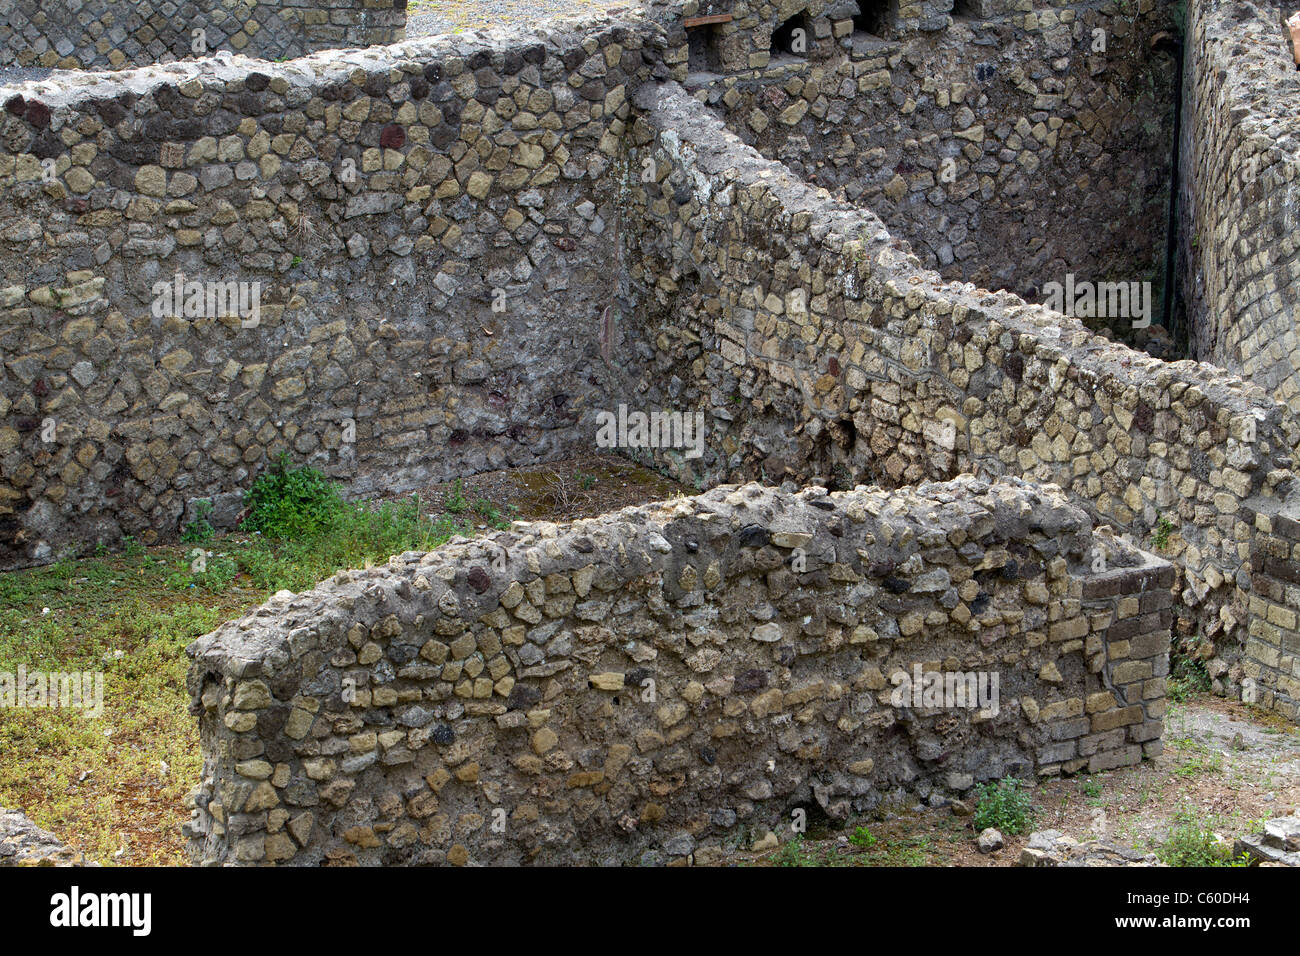 Pompeii Italy ruins of ancient city after the destruction by eruption of Mount Vesuvius volcano.  Ruins and rock walls Stock Photo